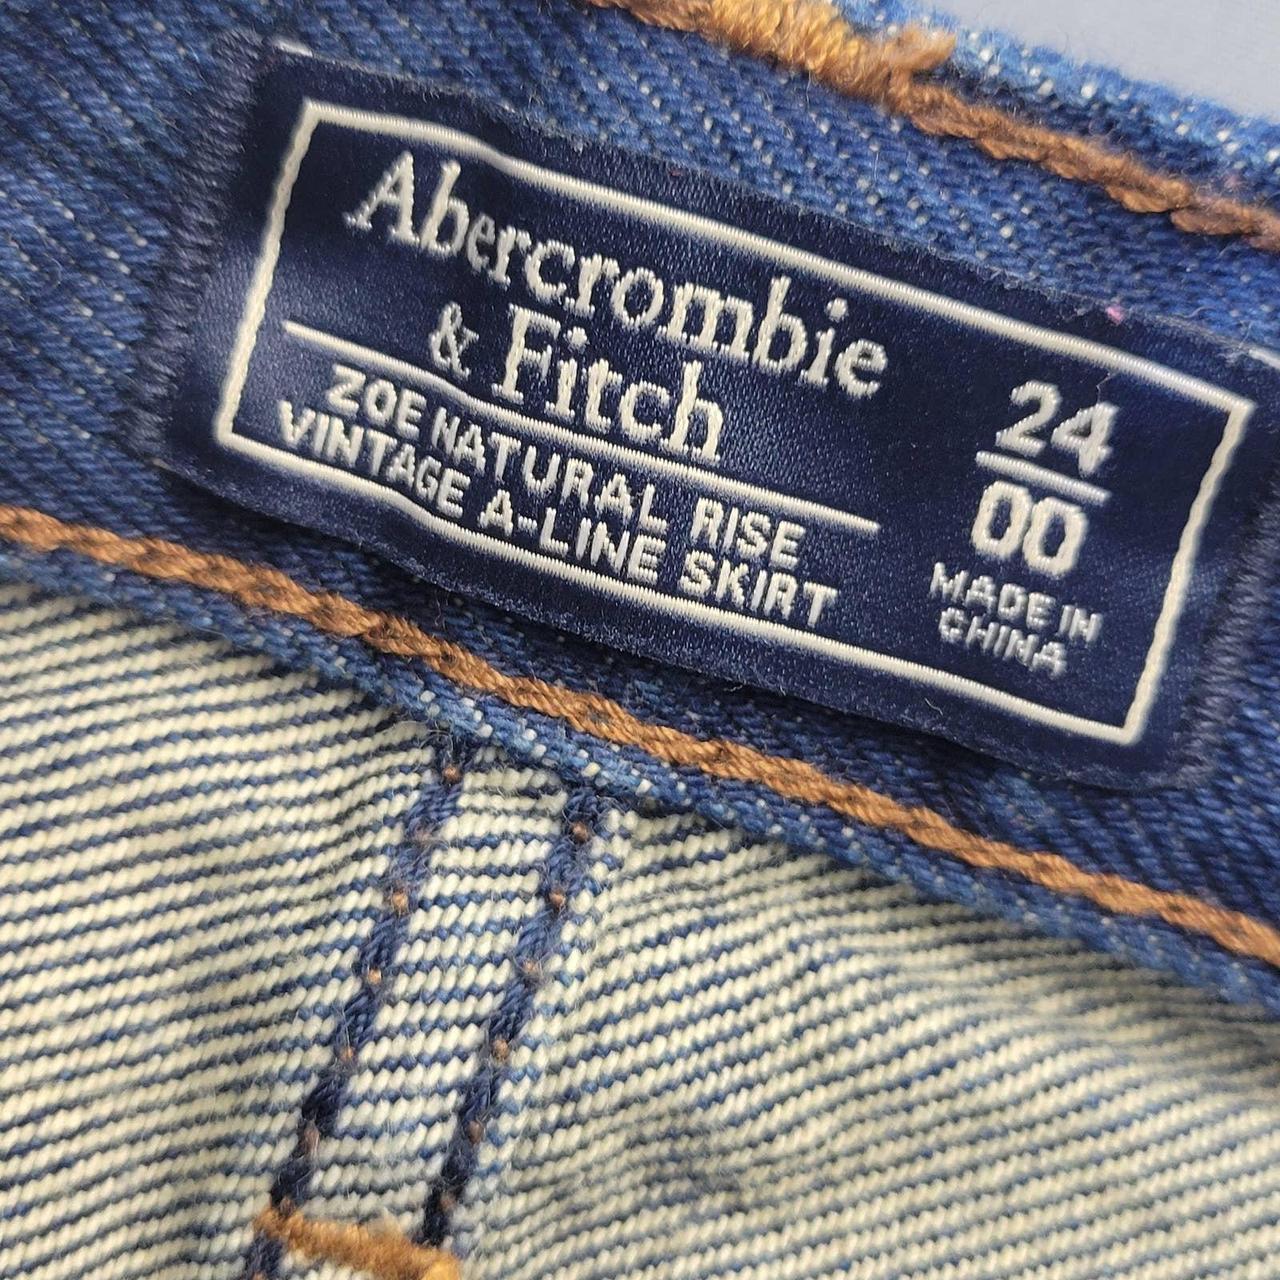 Abercrombie & Fitch Women's Blue Skirt (4)